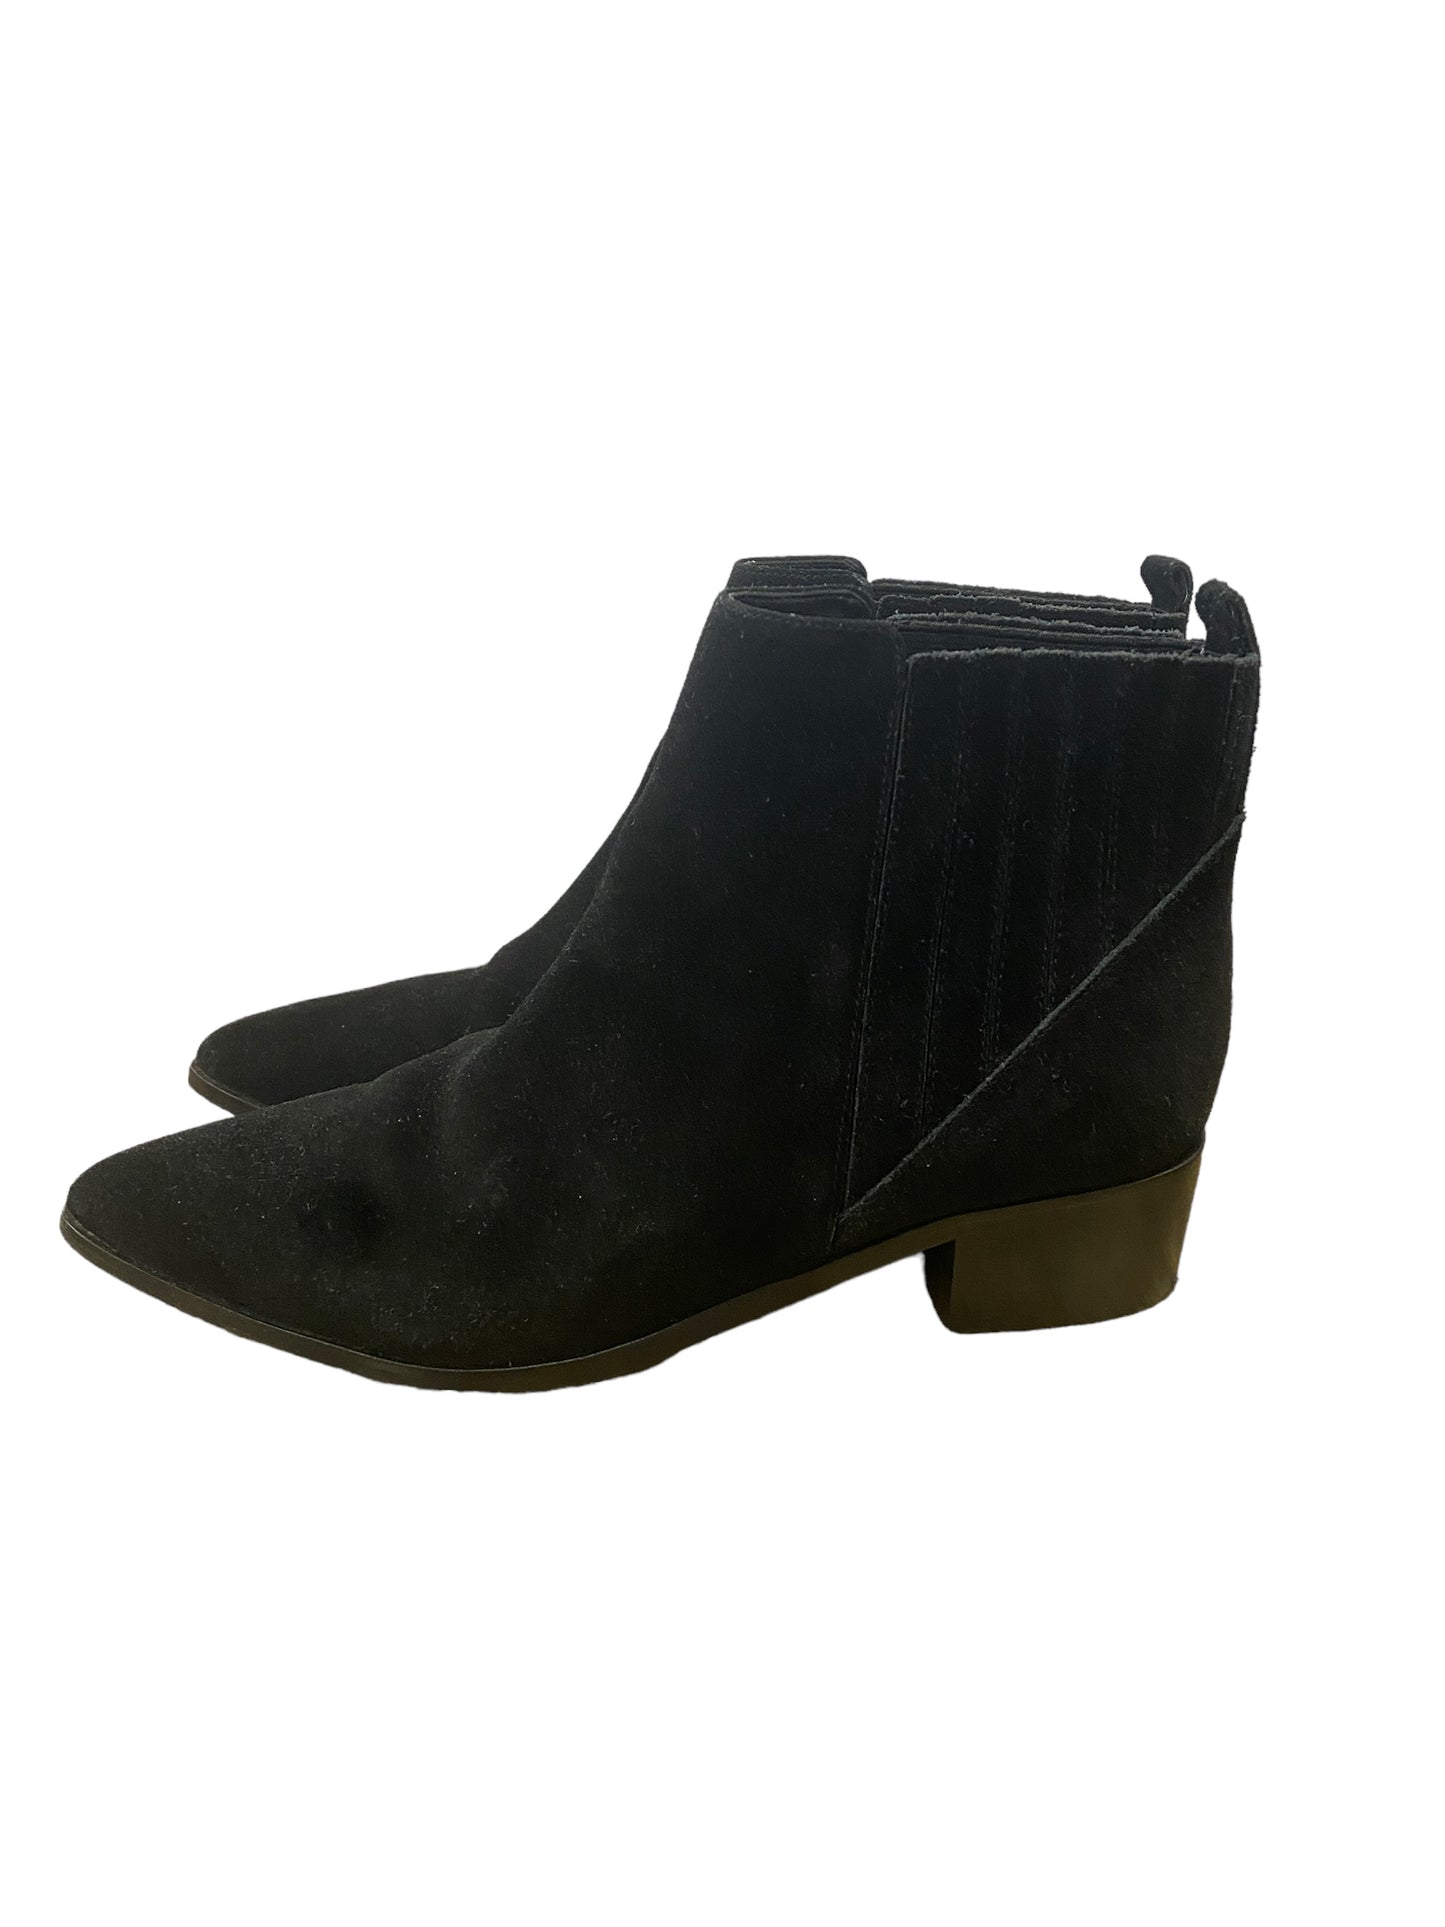 Boots Ankle Heels By Marc Fisher  Size: 9